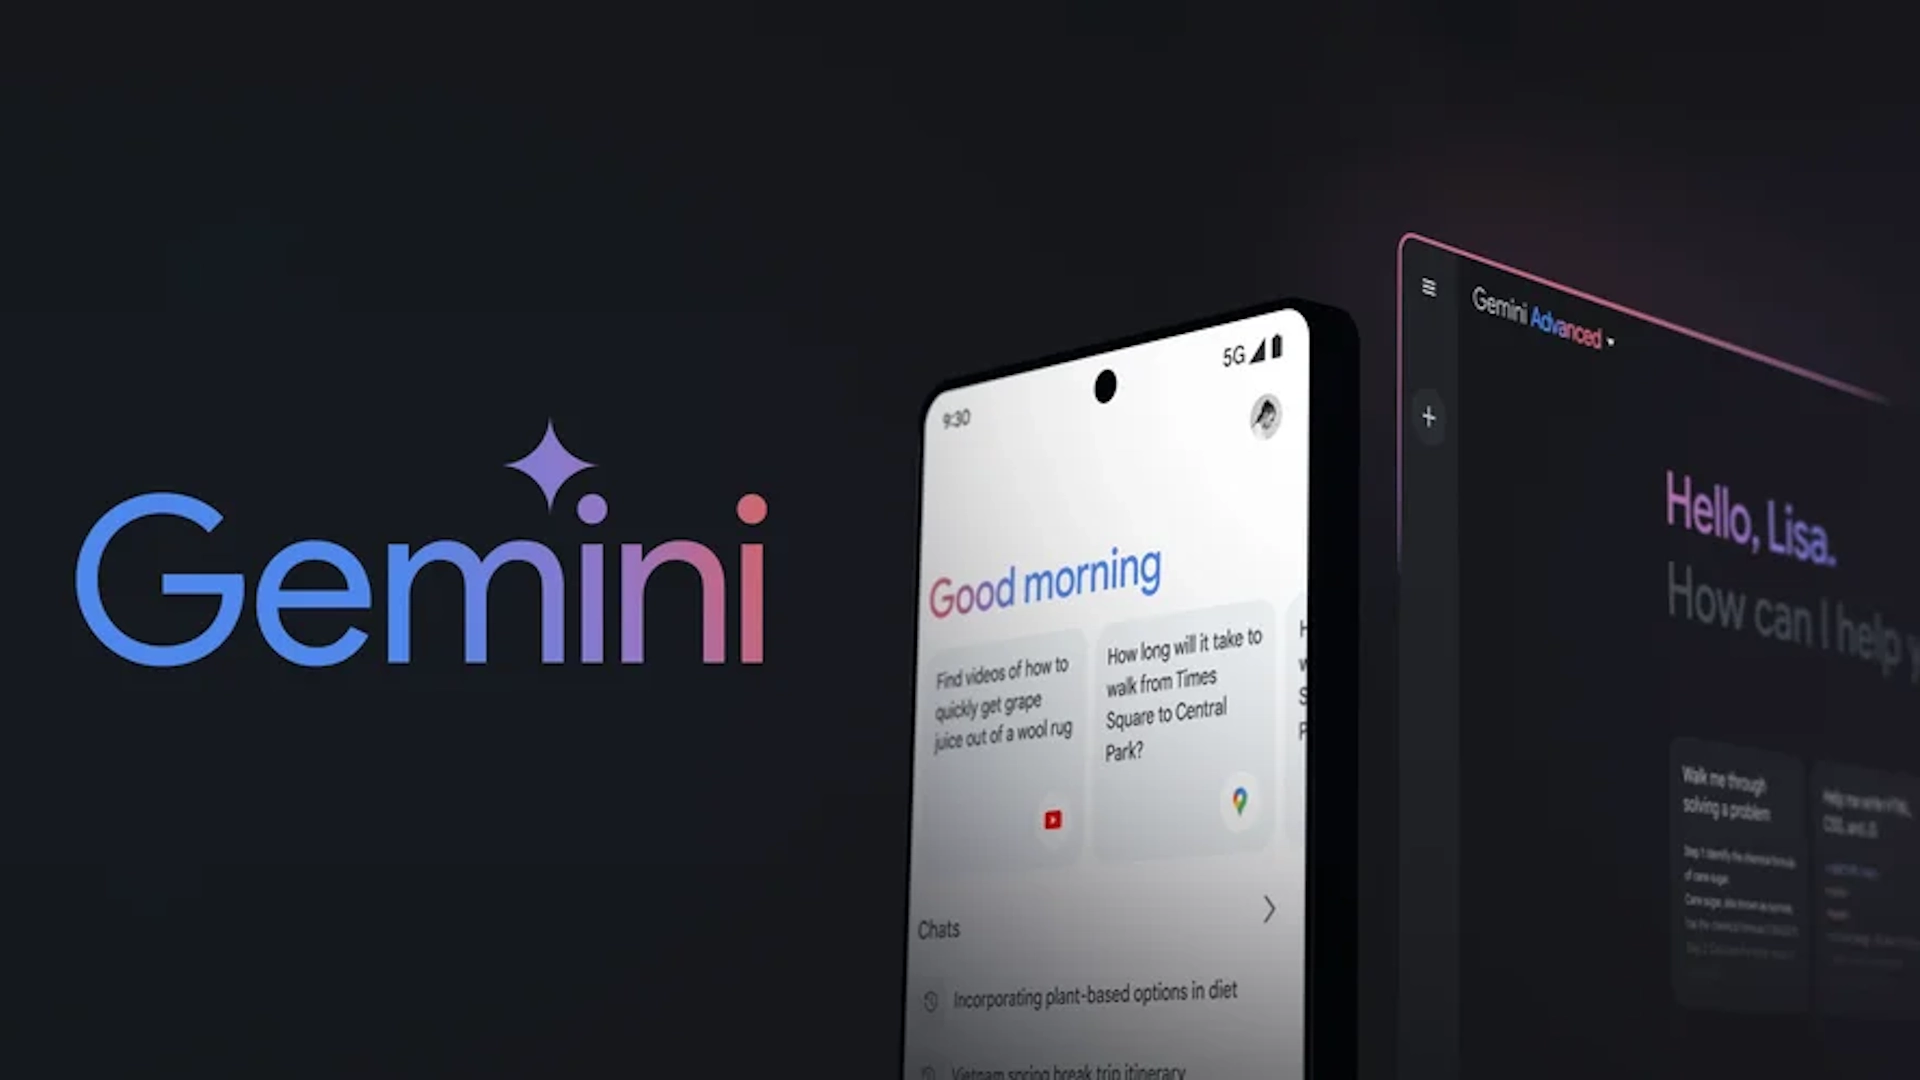 Google Bard became a Gemini after all and got its own application that replaces Google Assistant on Android devices